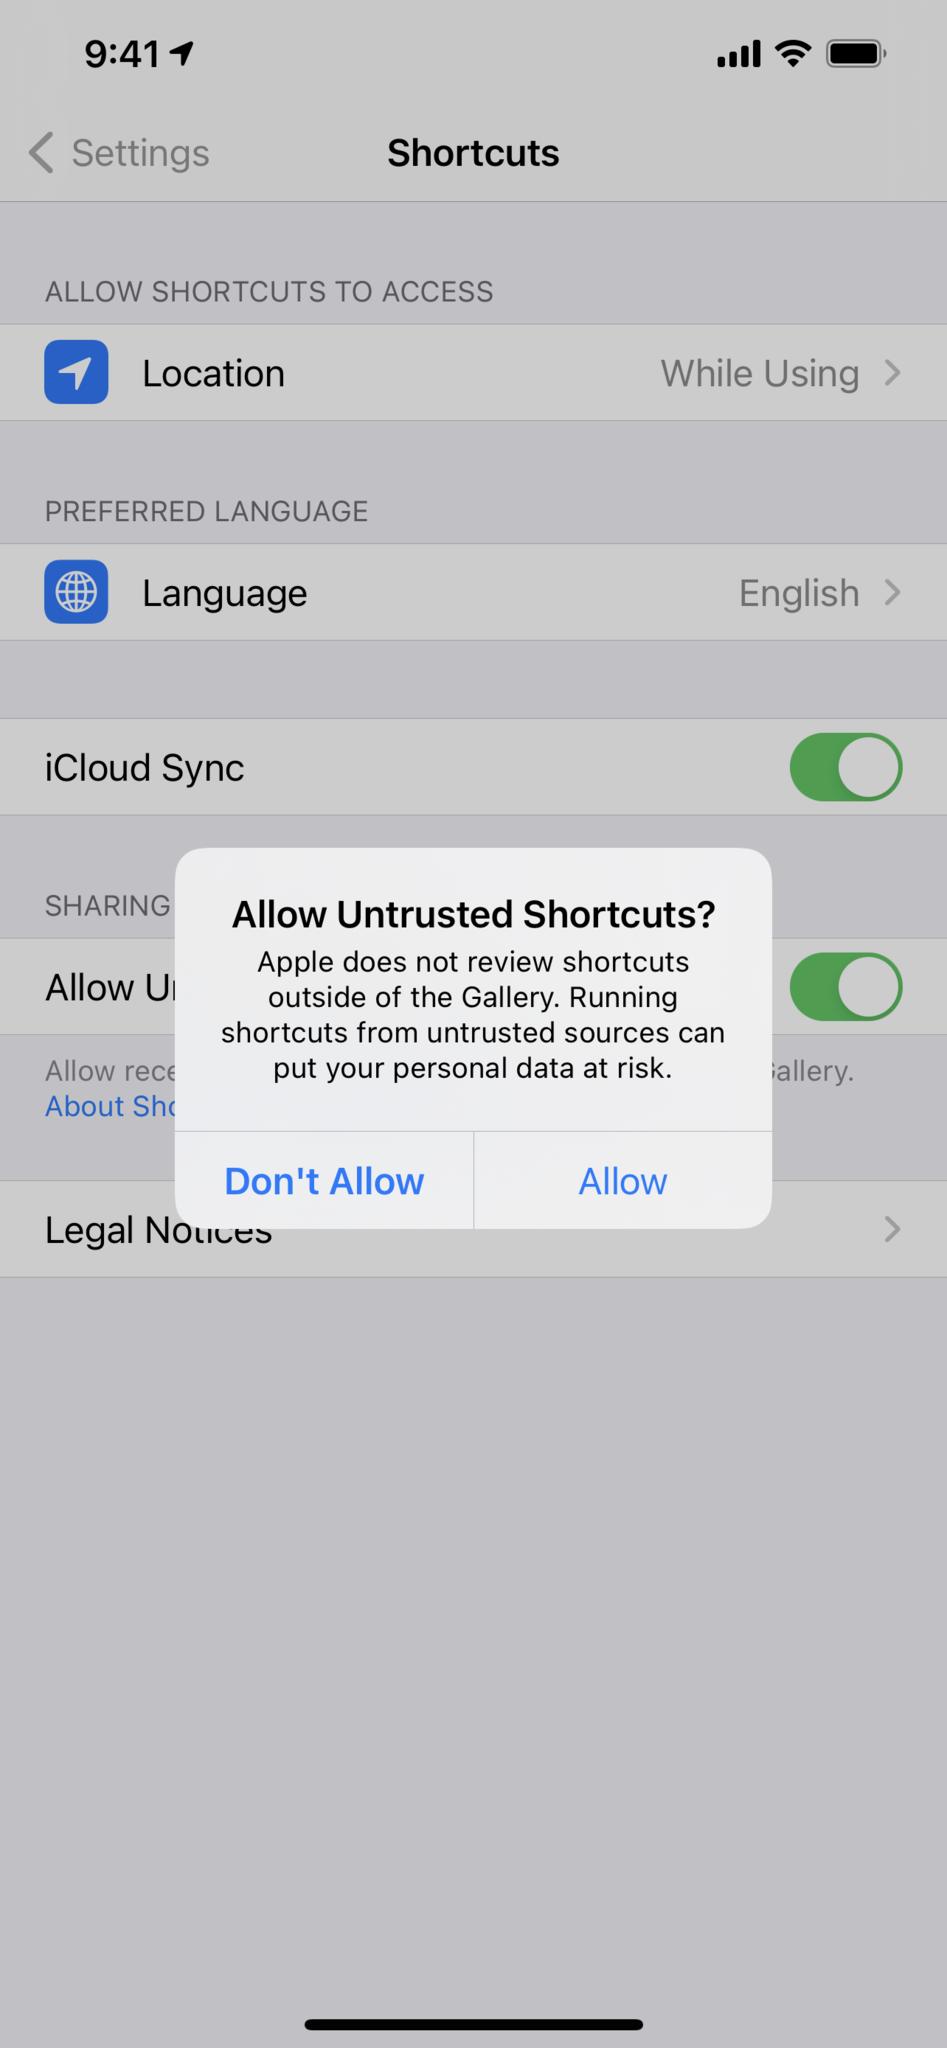 Screenshot showing warning message "Allow Untrusted Shortcuts? Apple does not review Shortcuts outside the Gallery. Running shortcuts from untrusted shortcuts sources can put your personal data at risk." with options for Don't Allow and Allow.